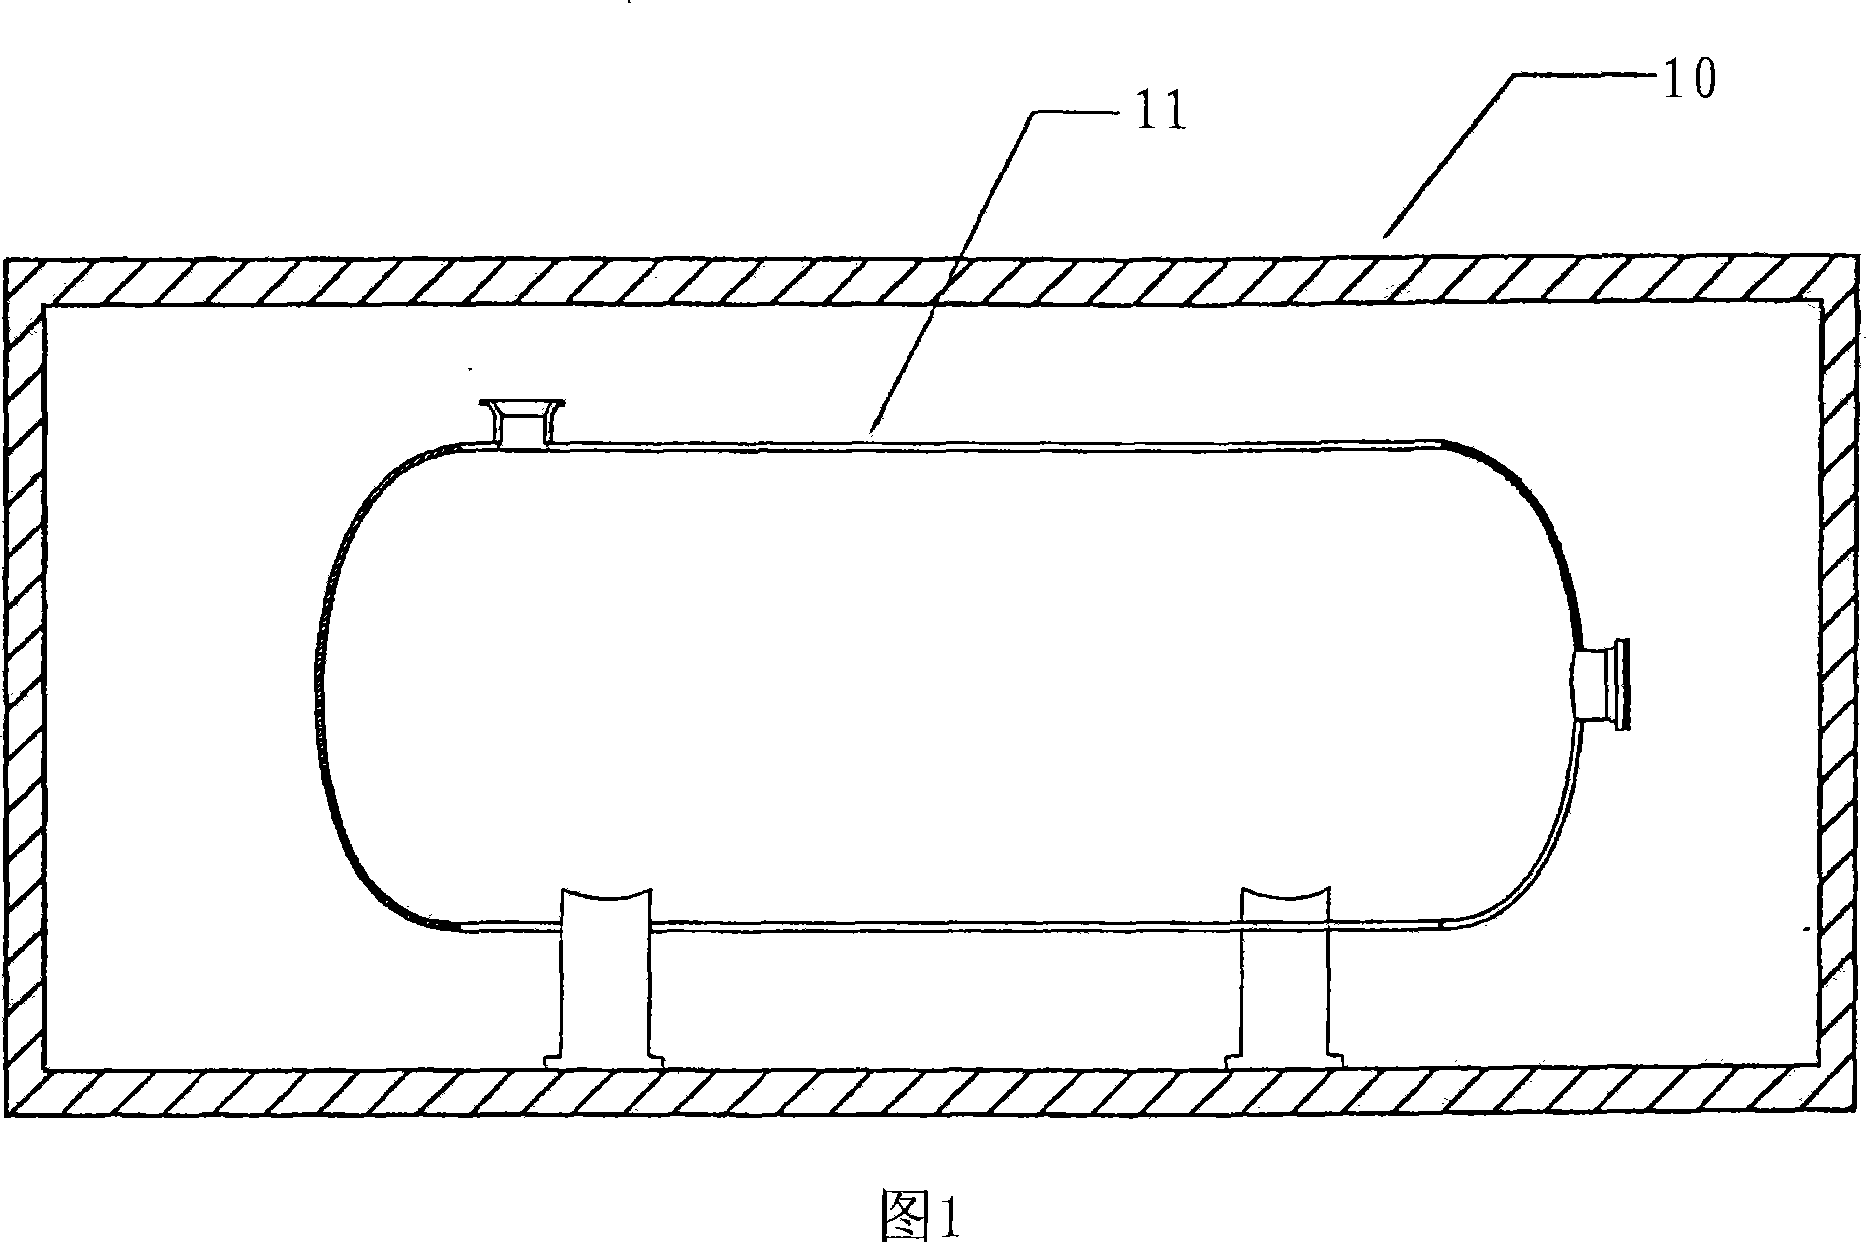 In-situ piecewise heat treatment method of large pressure container